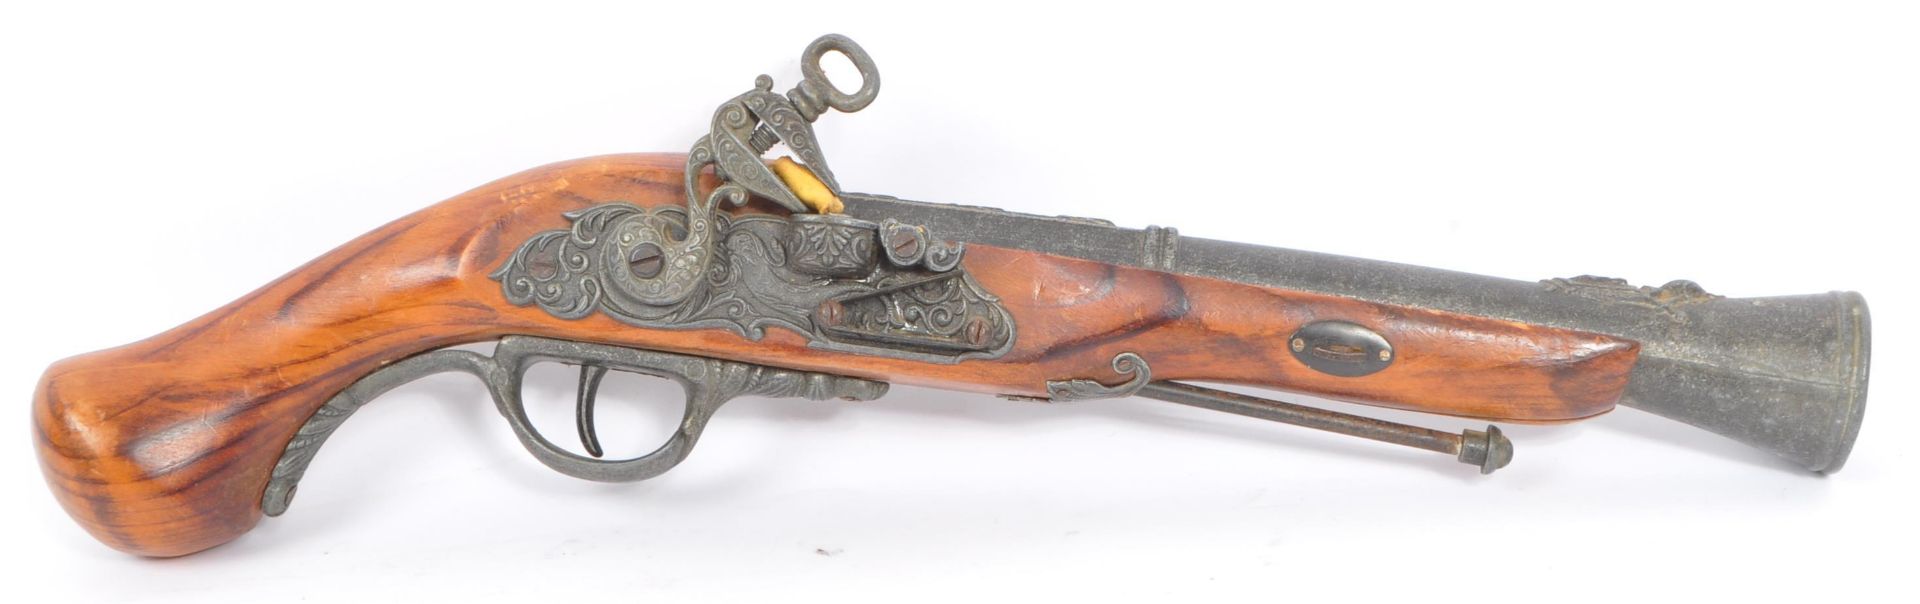 COLLECTION OF SIX REPRODUCTION FLINTLOCK 18TH CENTURY PISTOLS - Image 7 of 9